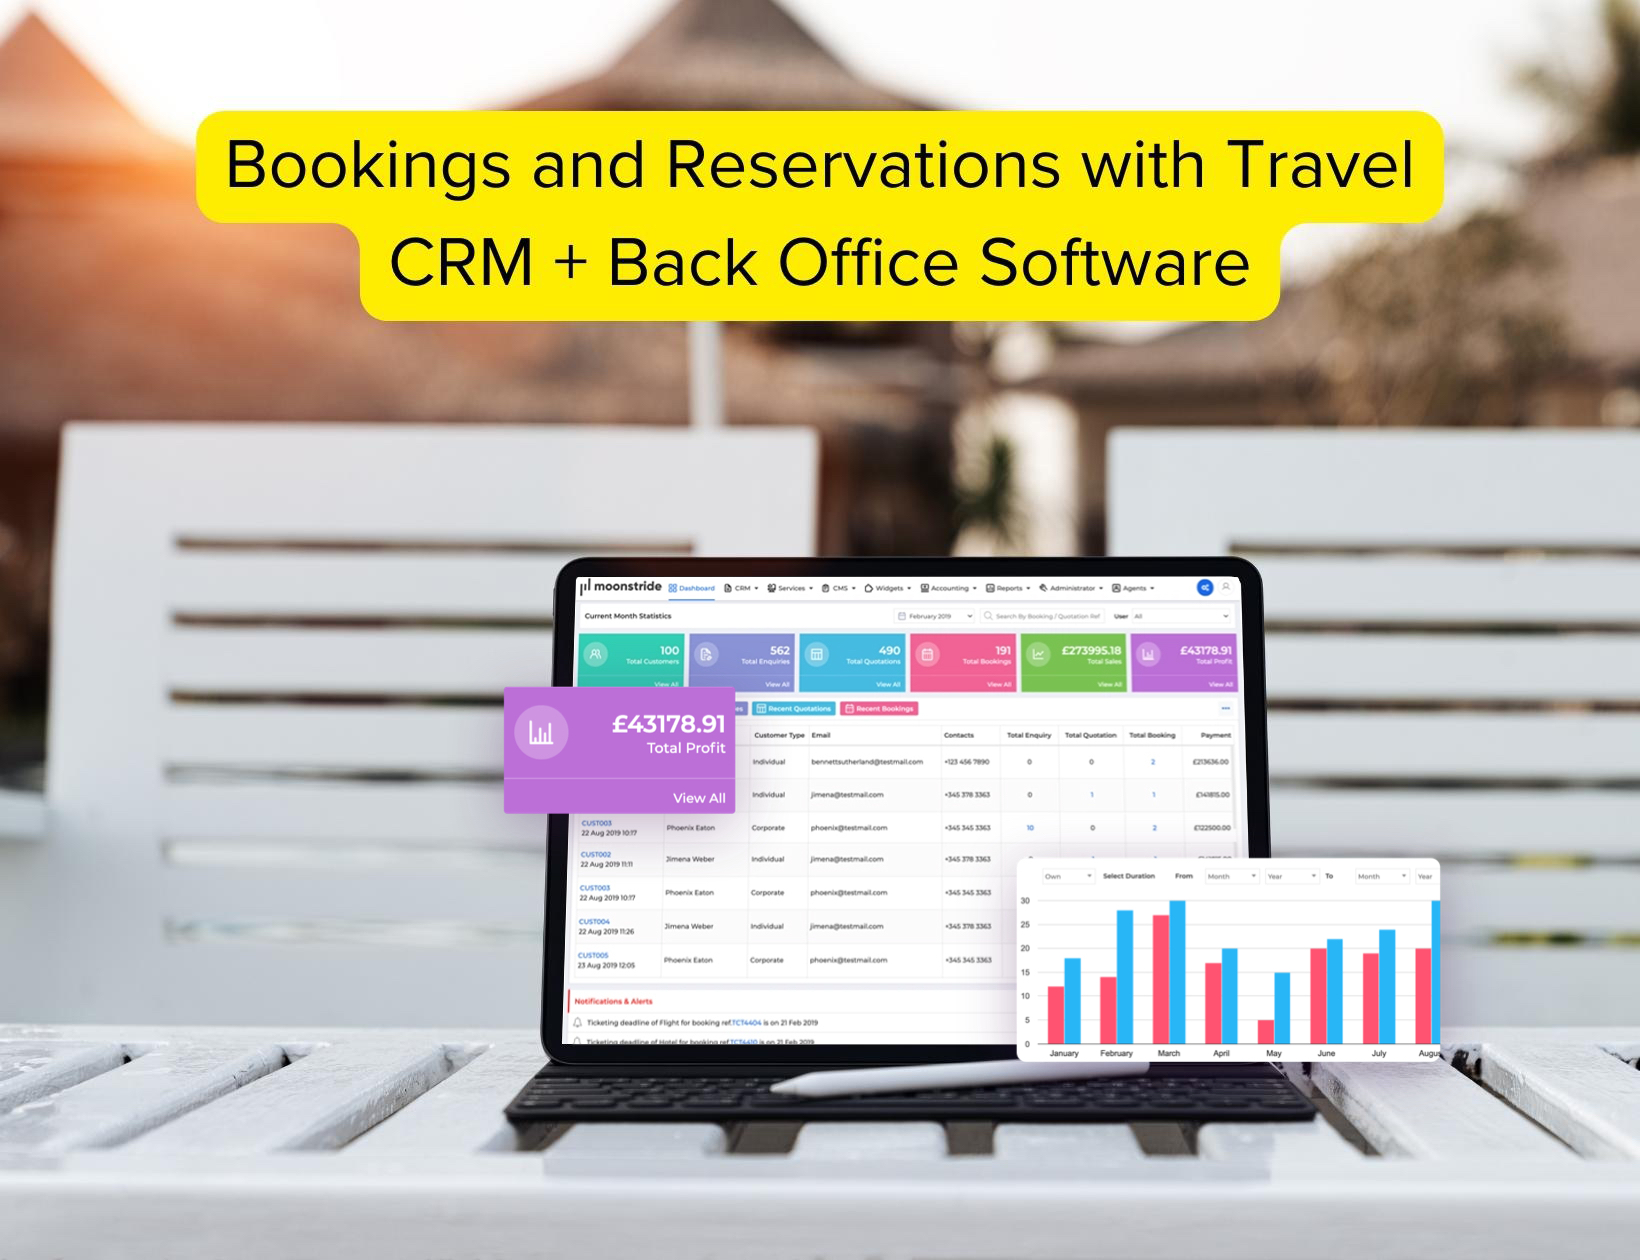 Best Practices for Managing Bookings and Reservations with Travel CRM + Back Office Software